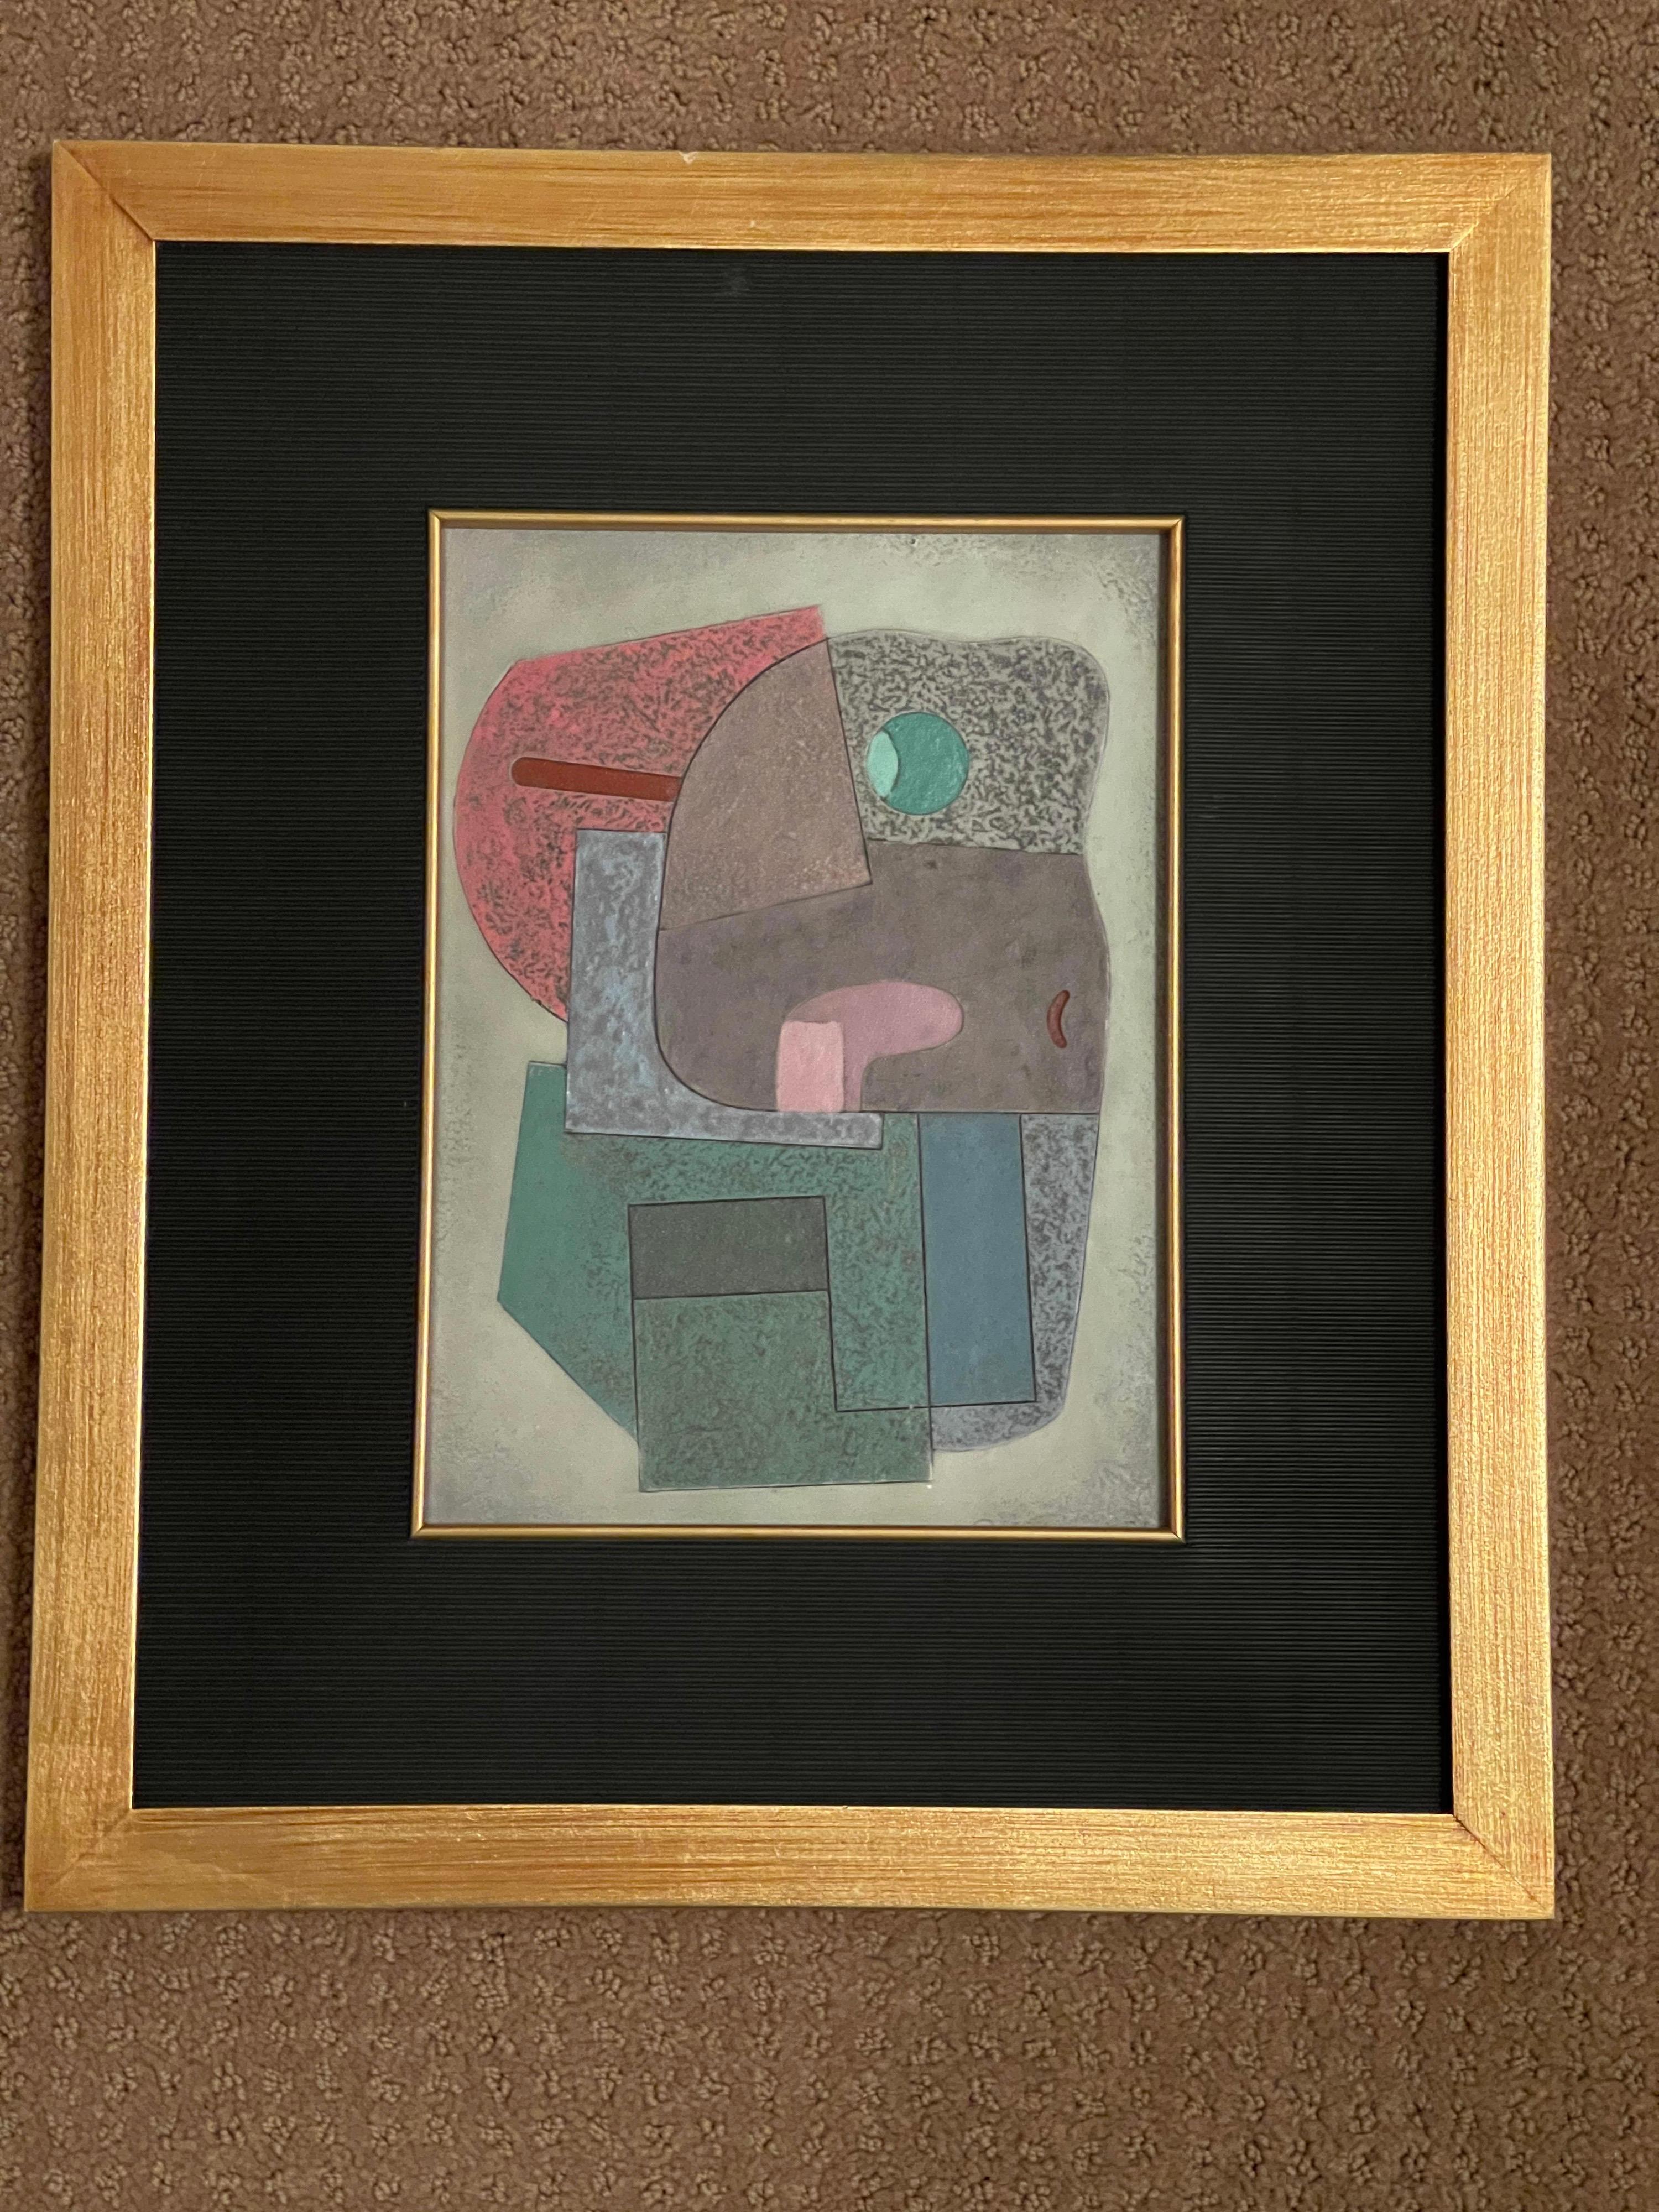 Post modern mixed media three dimensional abstract by listed Mexican artist Jose Luis Serrano, circa 1982. Framed and mounted on board measuring 15.75